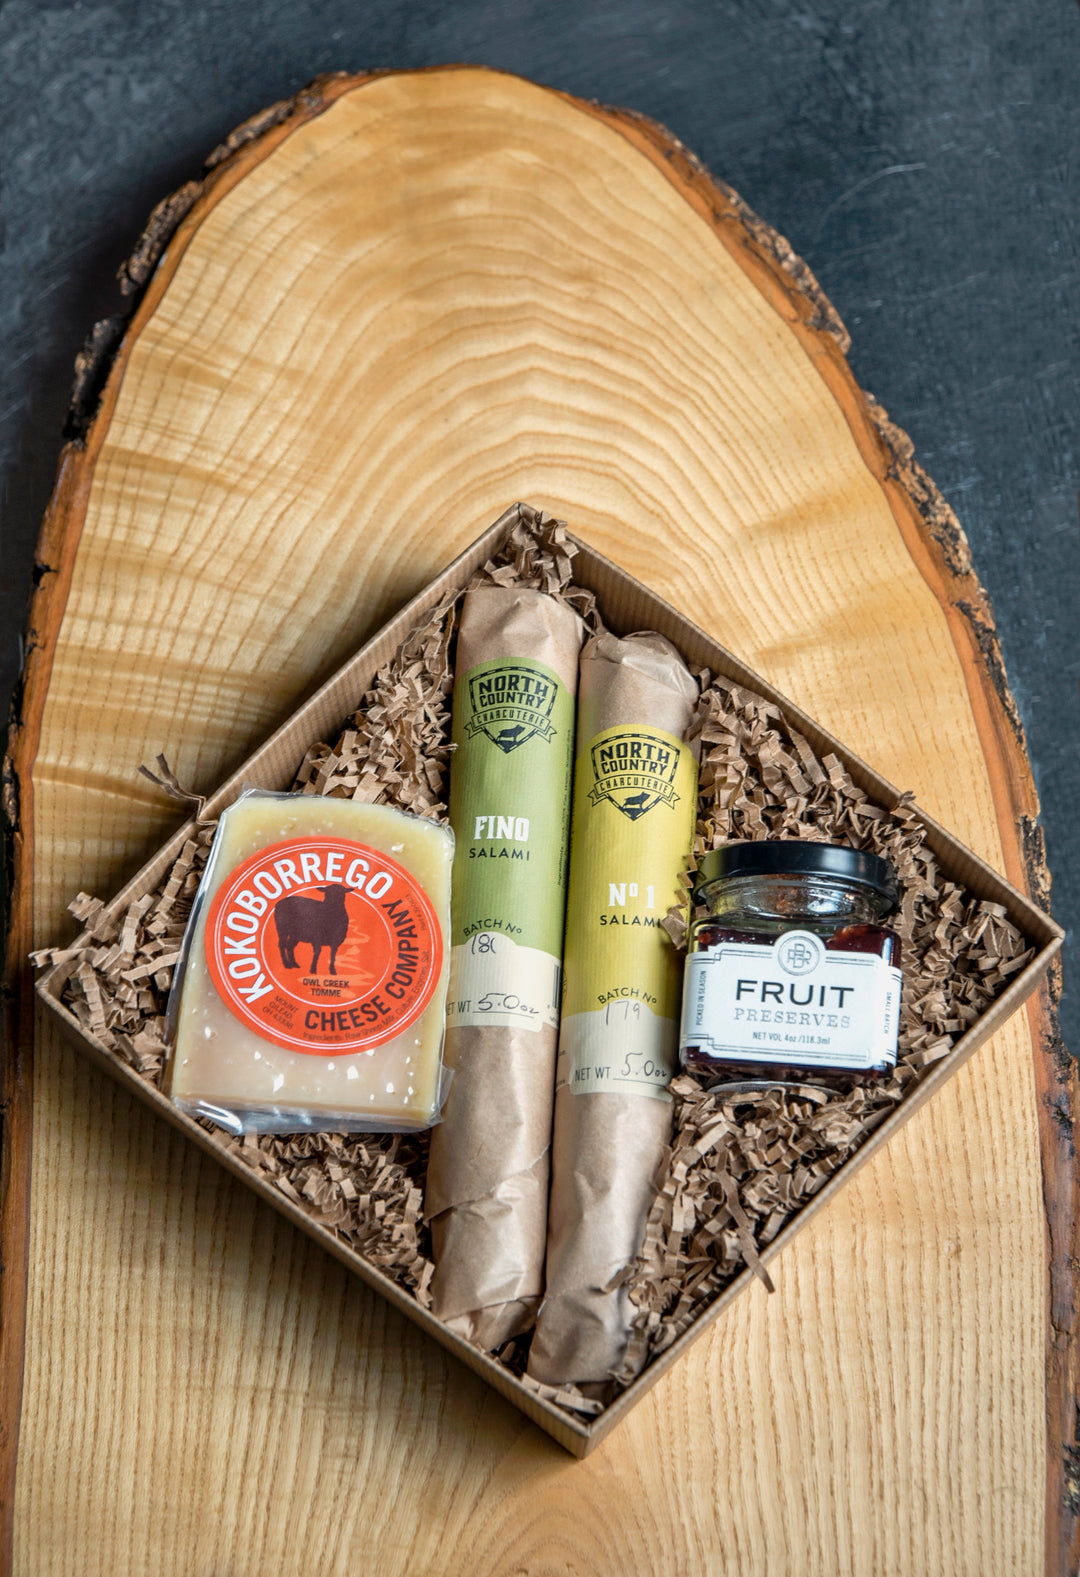 Salami-maker North Country Charcuterie navigating Covid-19 with new products and partnerships